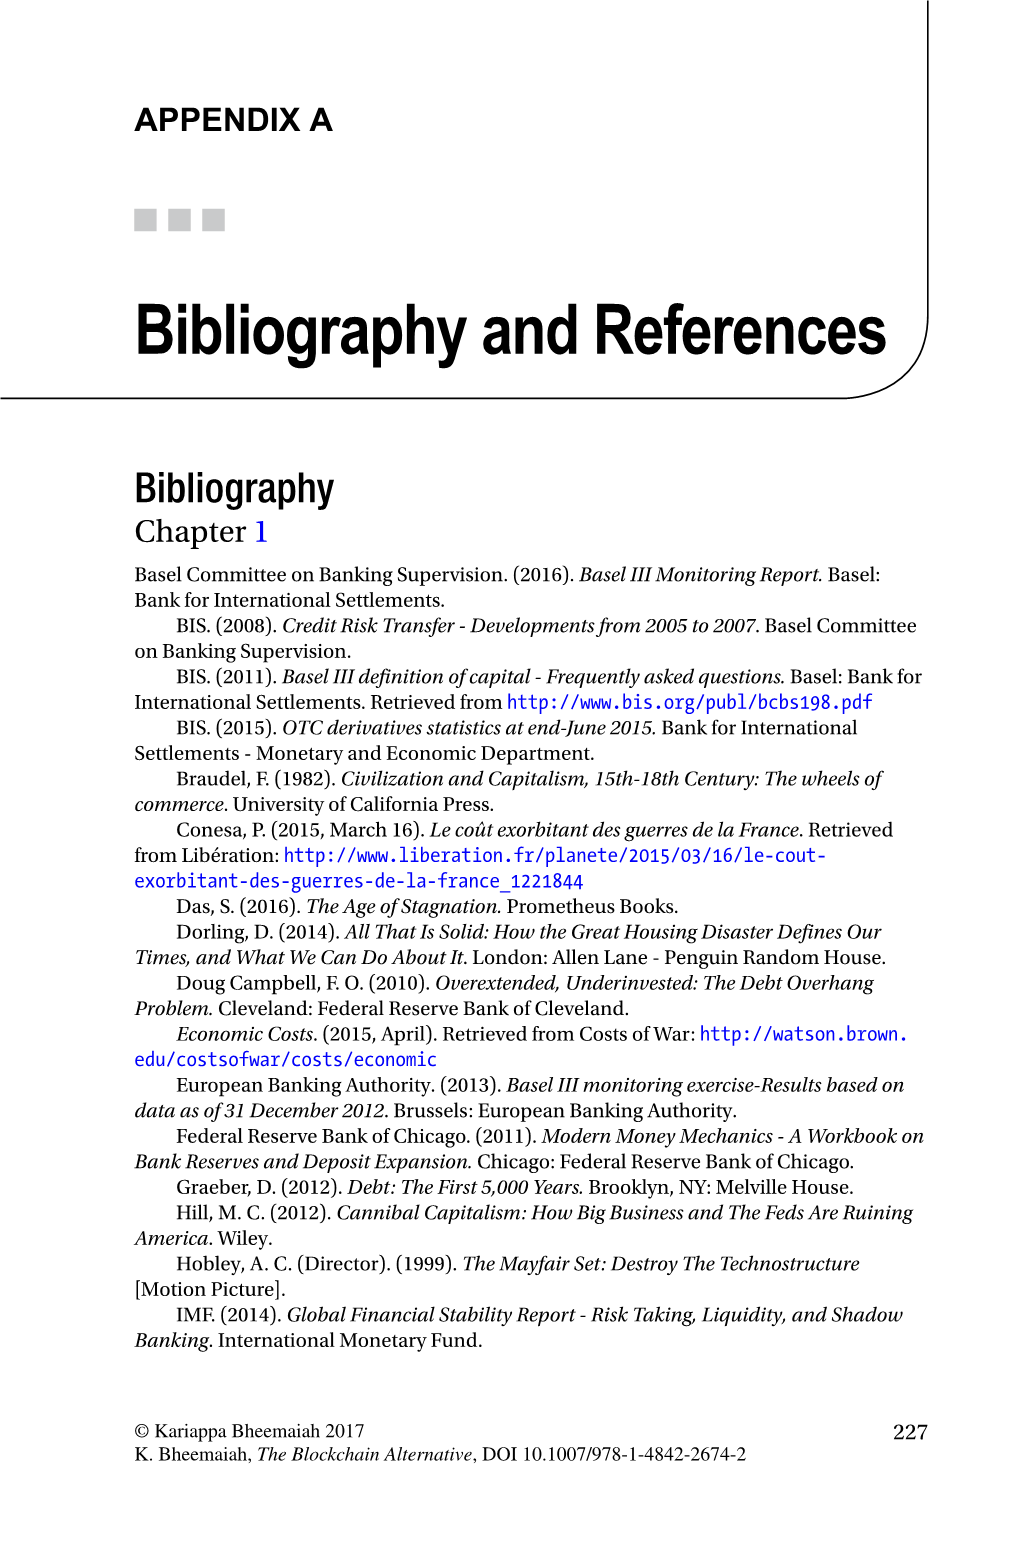 Bibliography and References